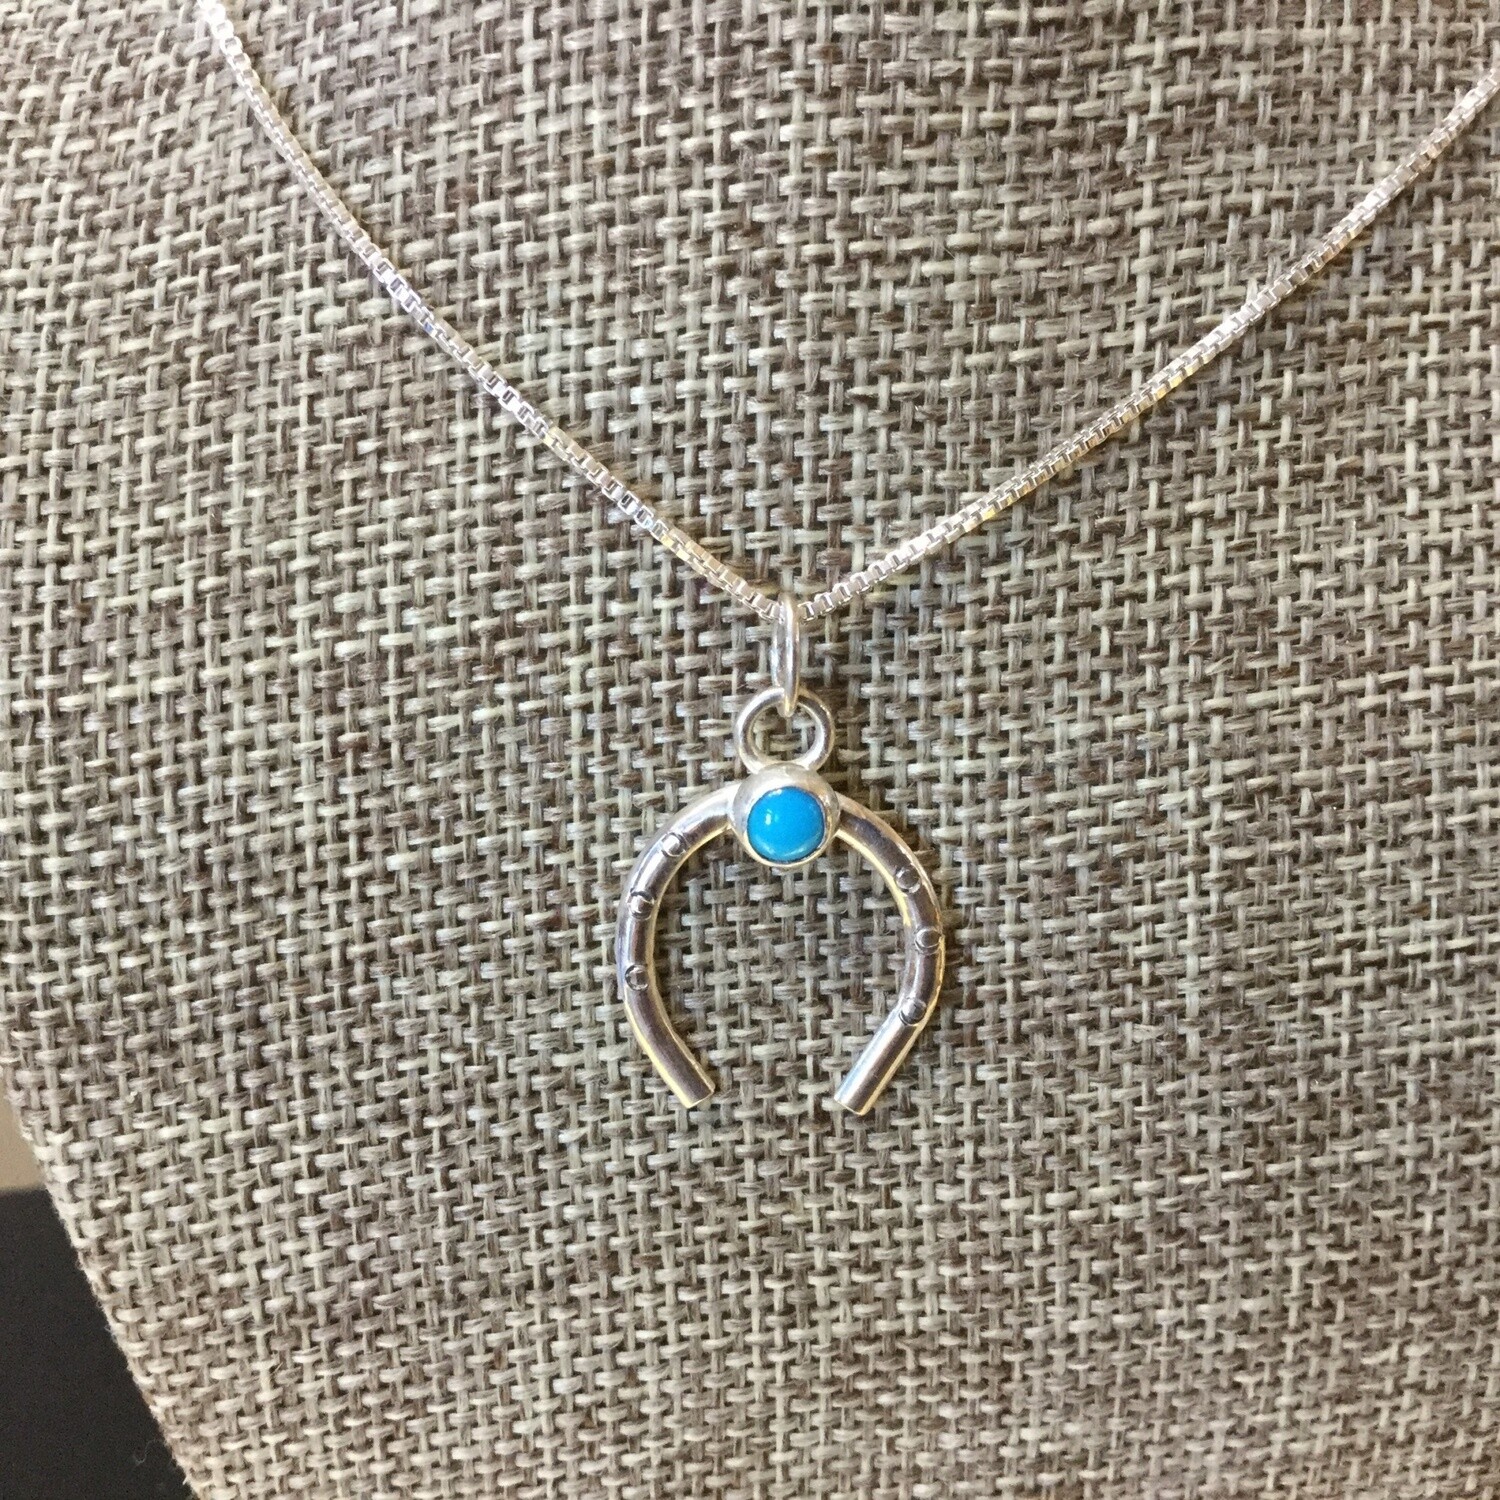 Horseshoe Charm Necklace, Sterling Silver